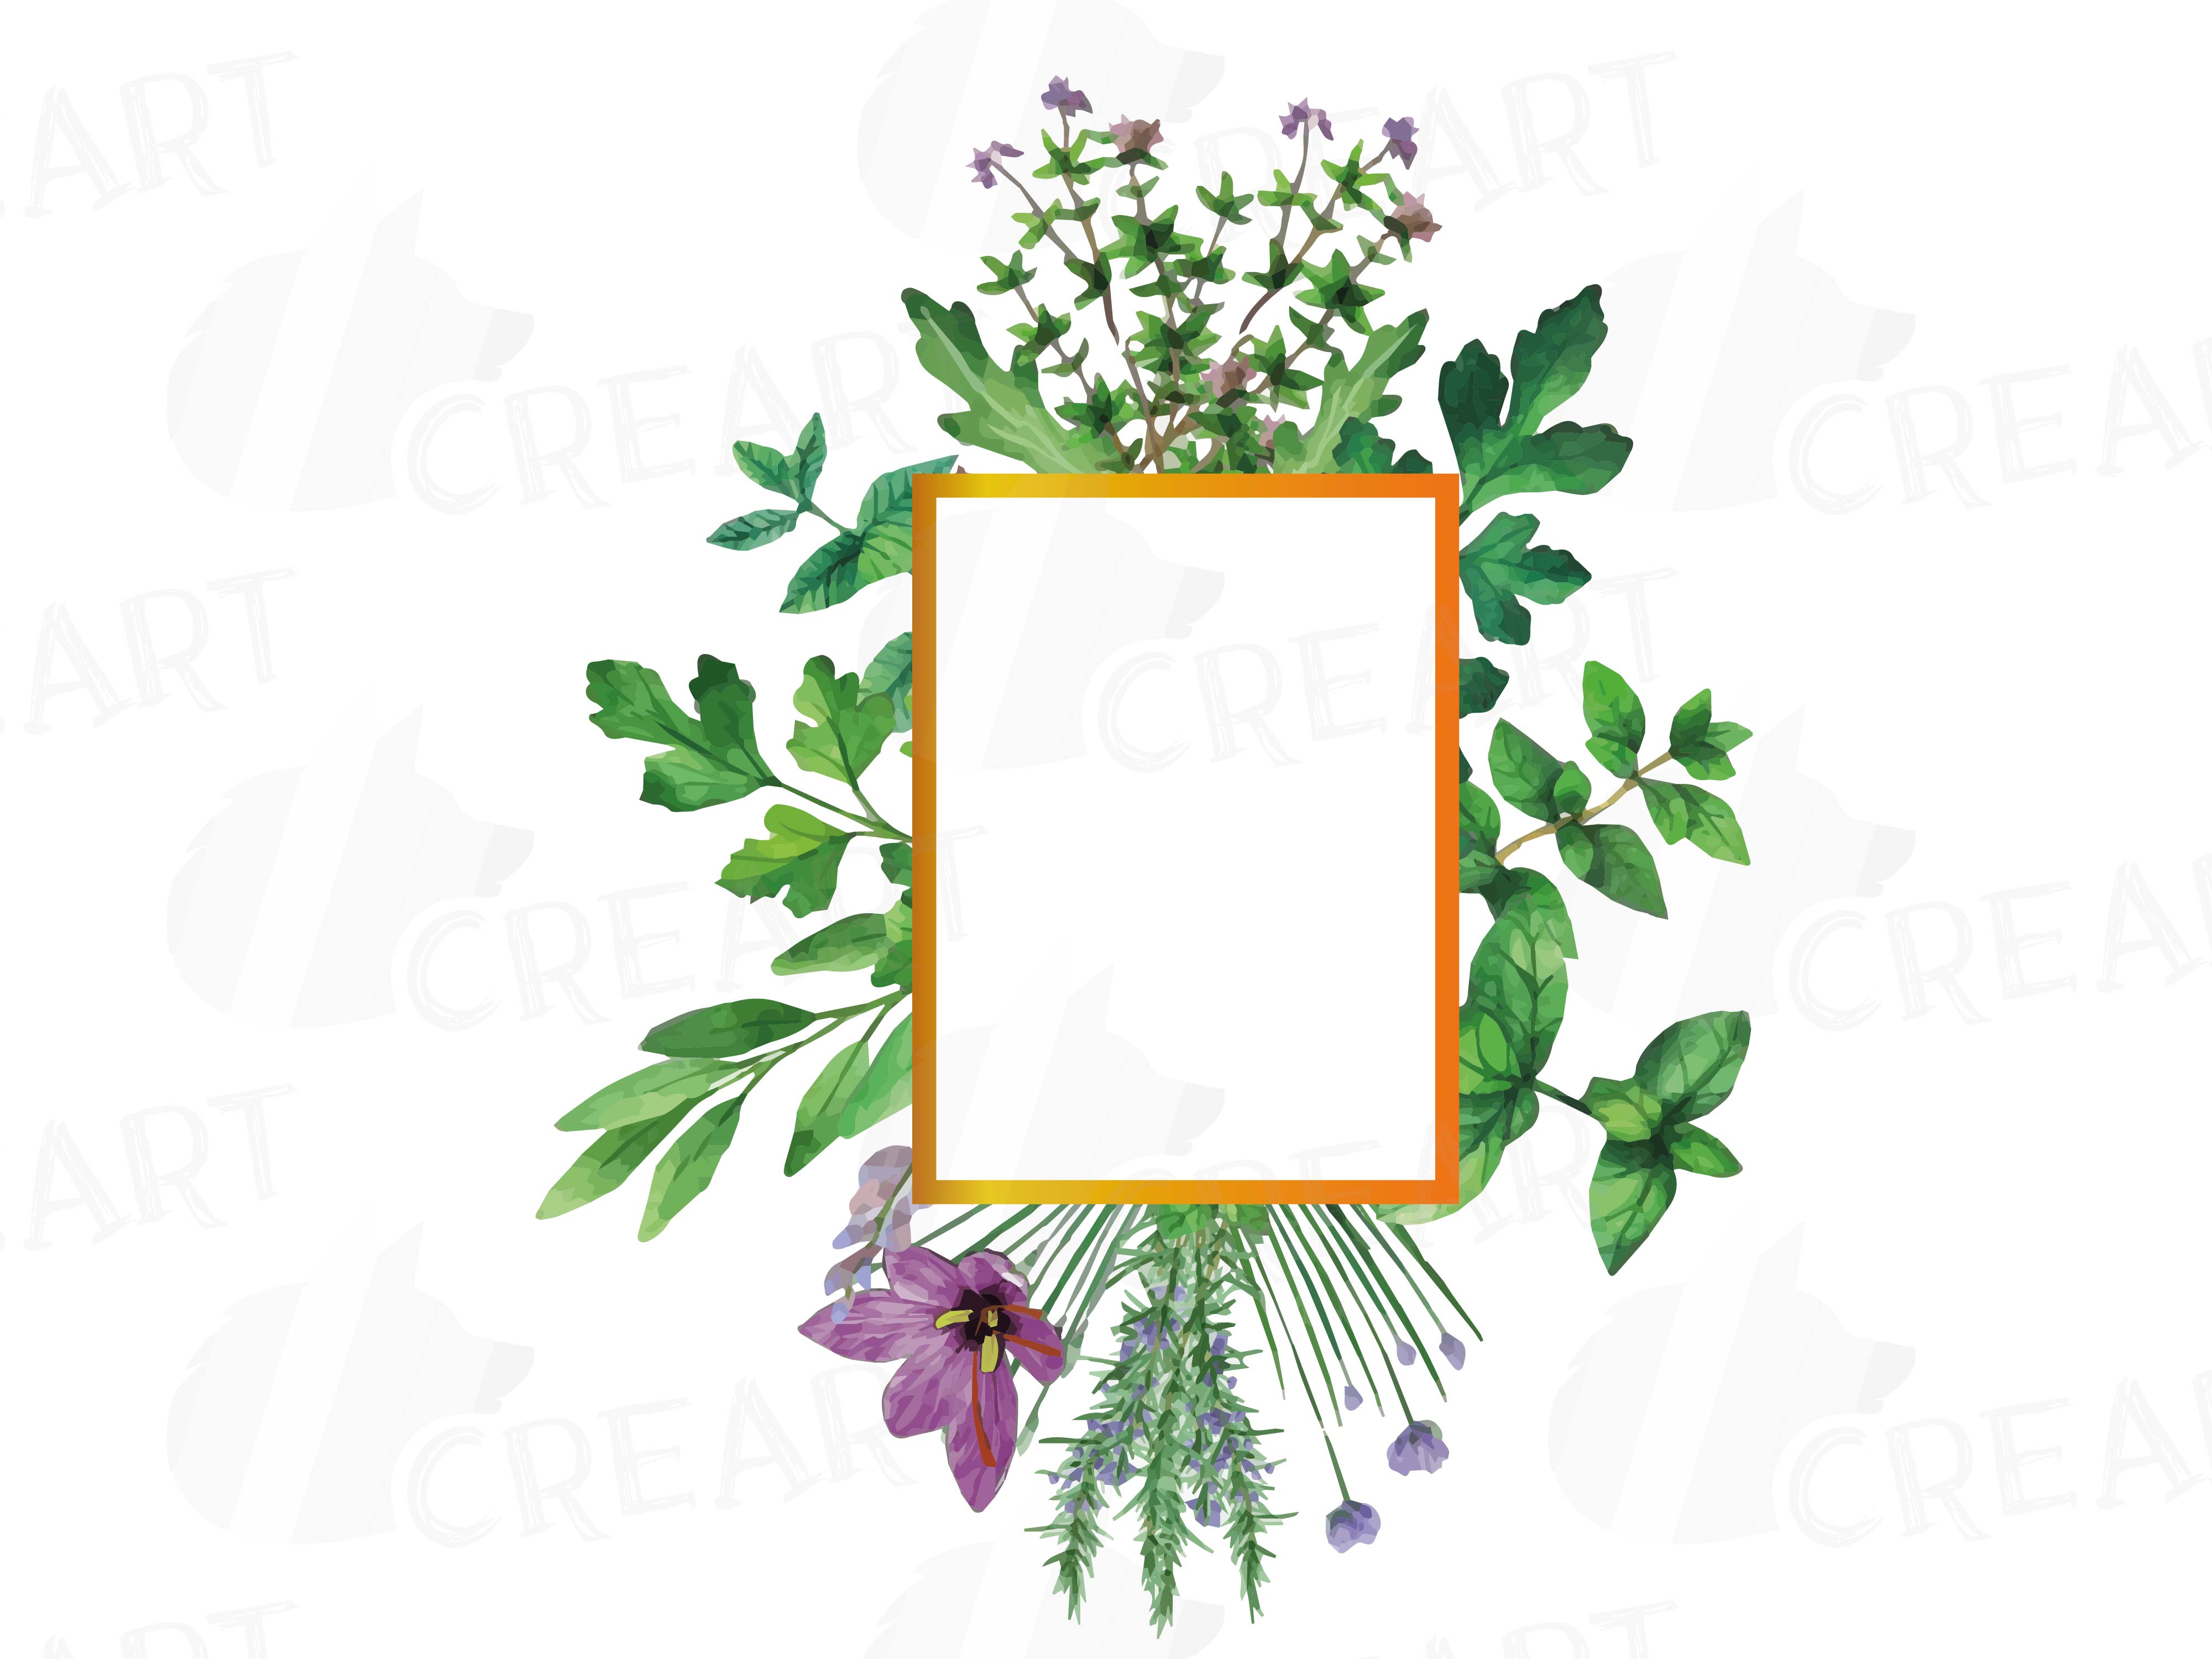 Herbs and Spices frames watercolor clip art pack, watercolor herb leaves  borders. PNG, jpg, svg, vector illustrator & corel files included.